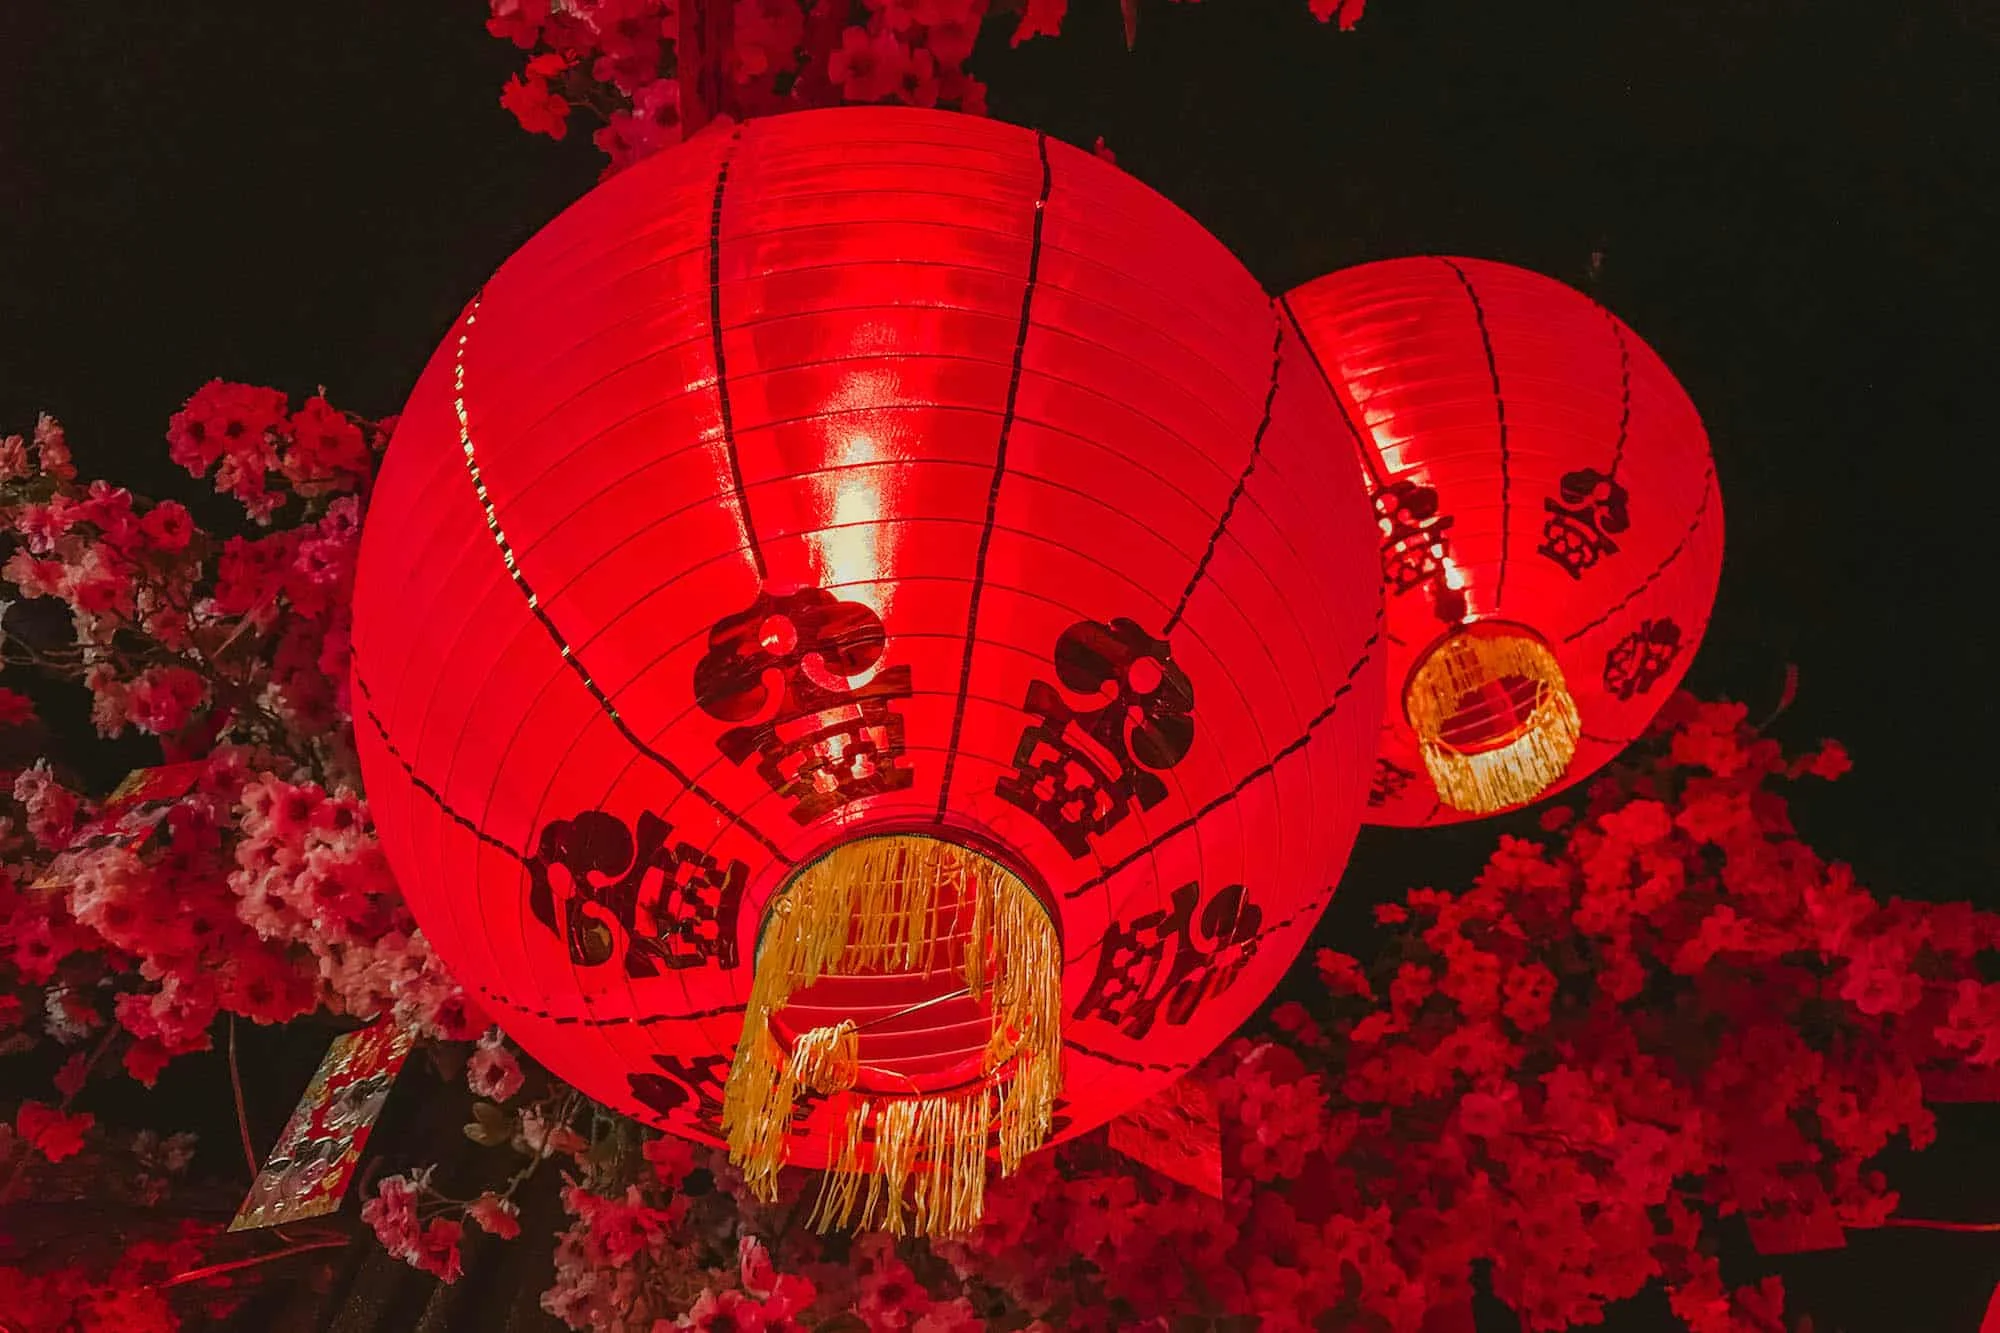 Lunar New Year at FlyOver Canada in Vancouver, British Columbia